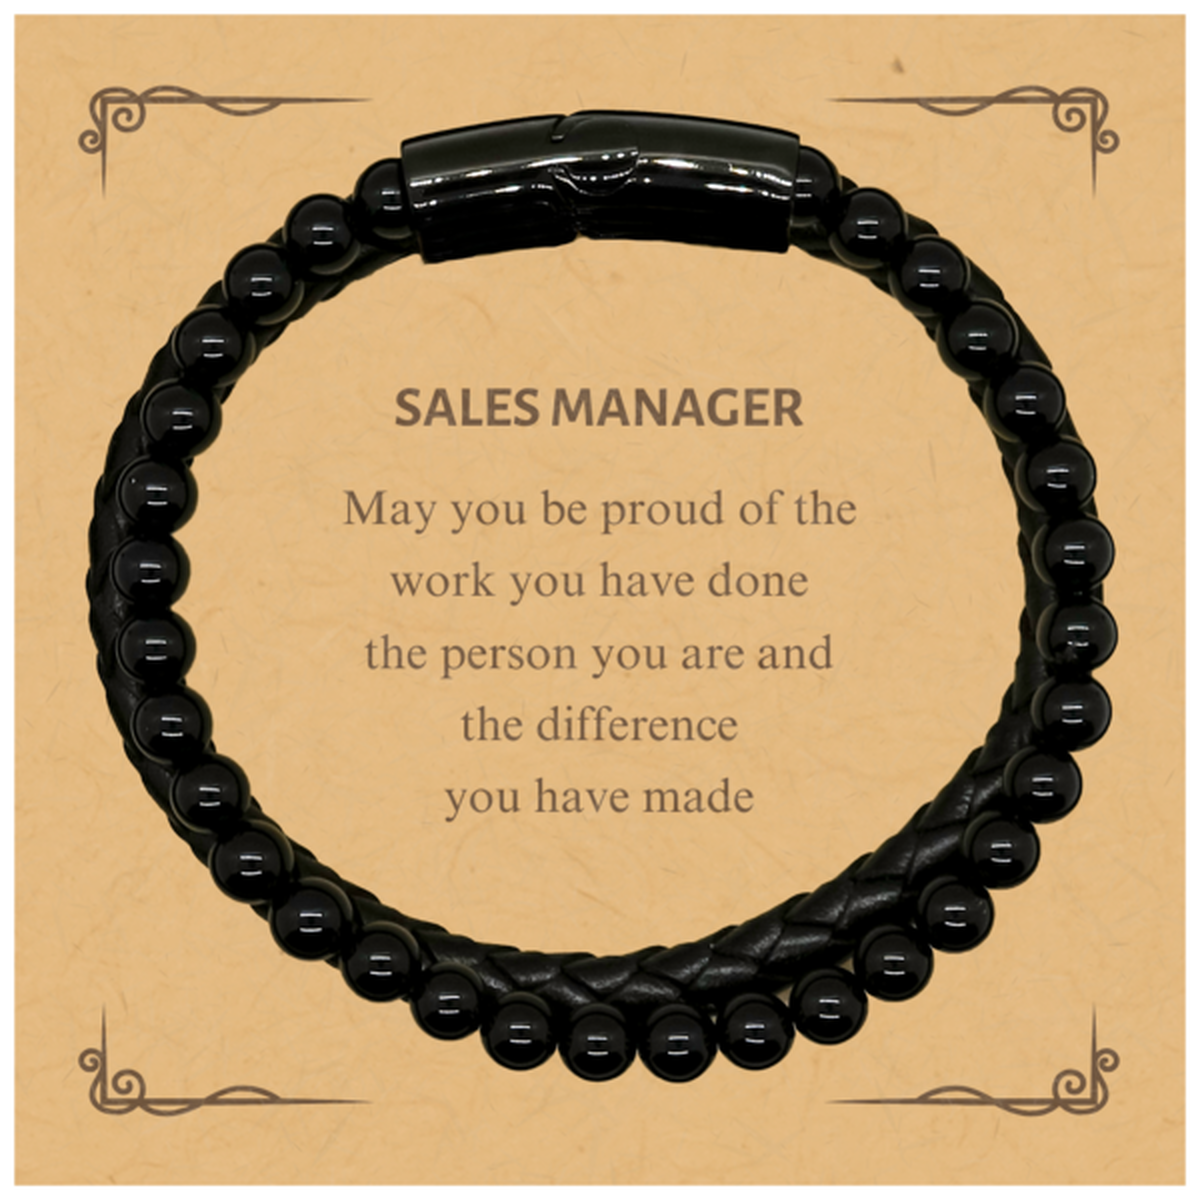 Sales Manager May you be proud of the work you have done, Retirement Sales Manager Stone Leather Bracelets for Colleague Appreciation Gifts Amazing for Sales Manager